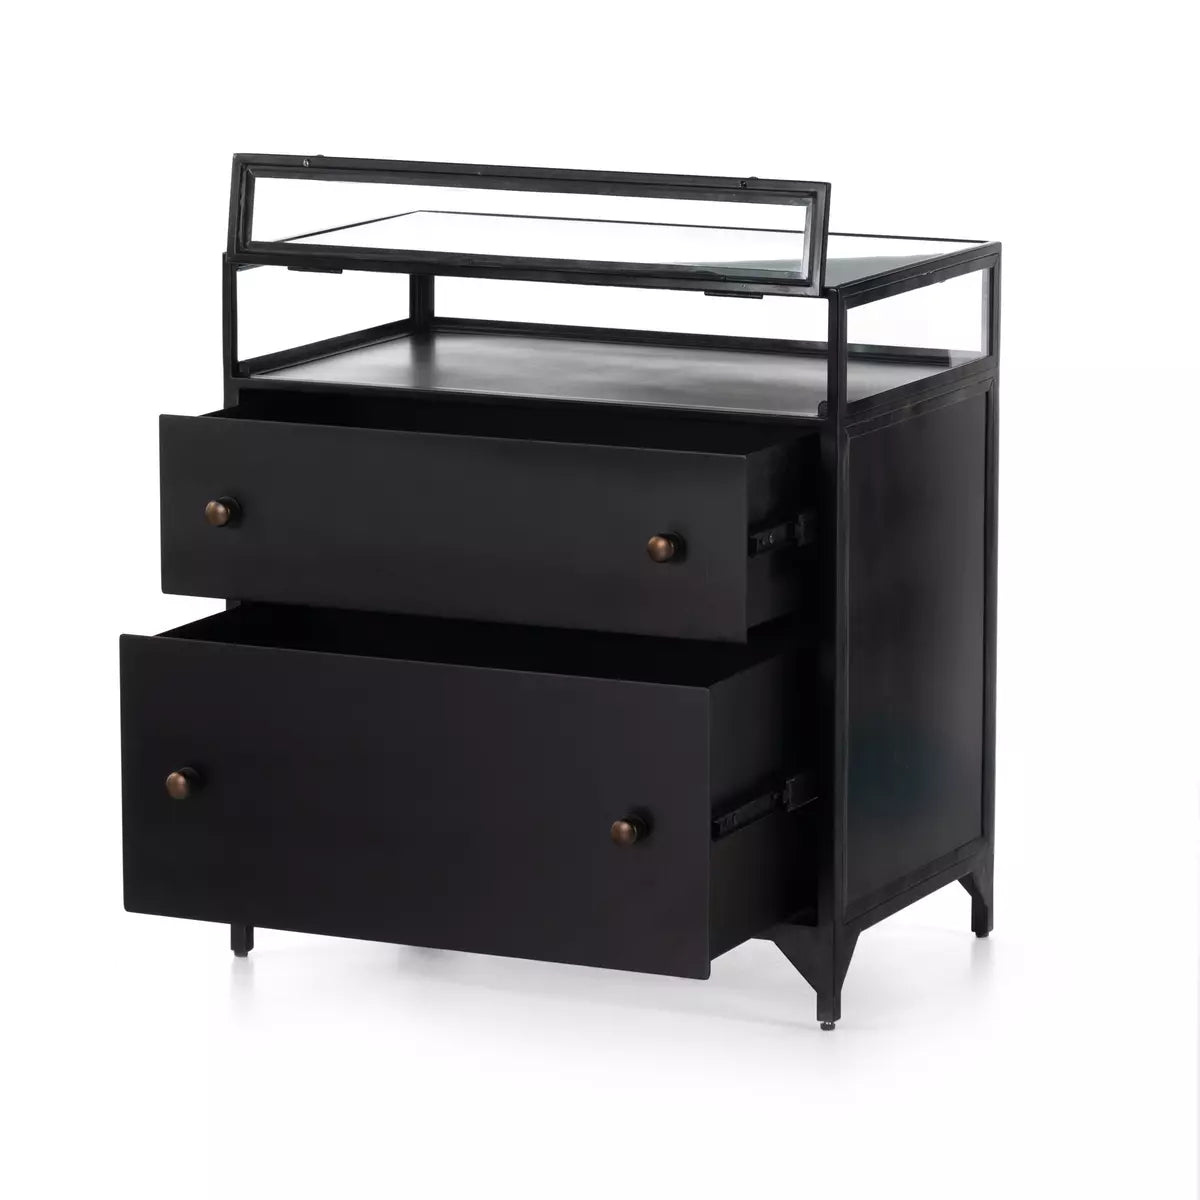 NIGHTSTAND WITH DISPLAY